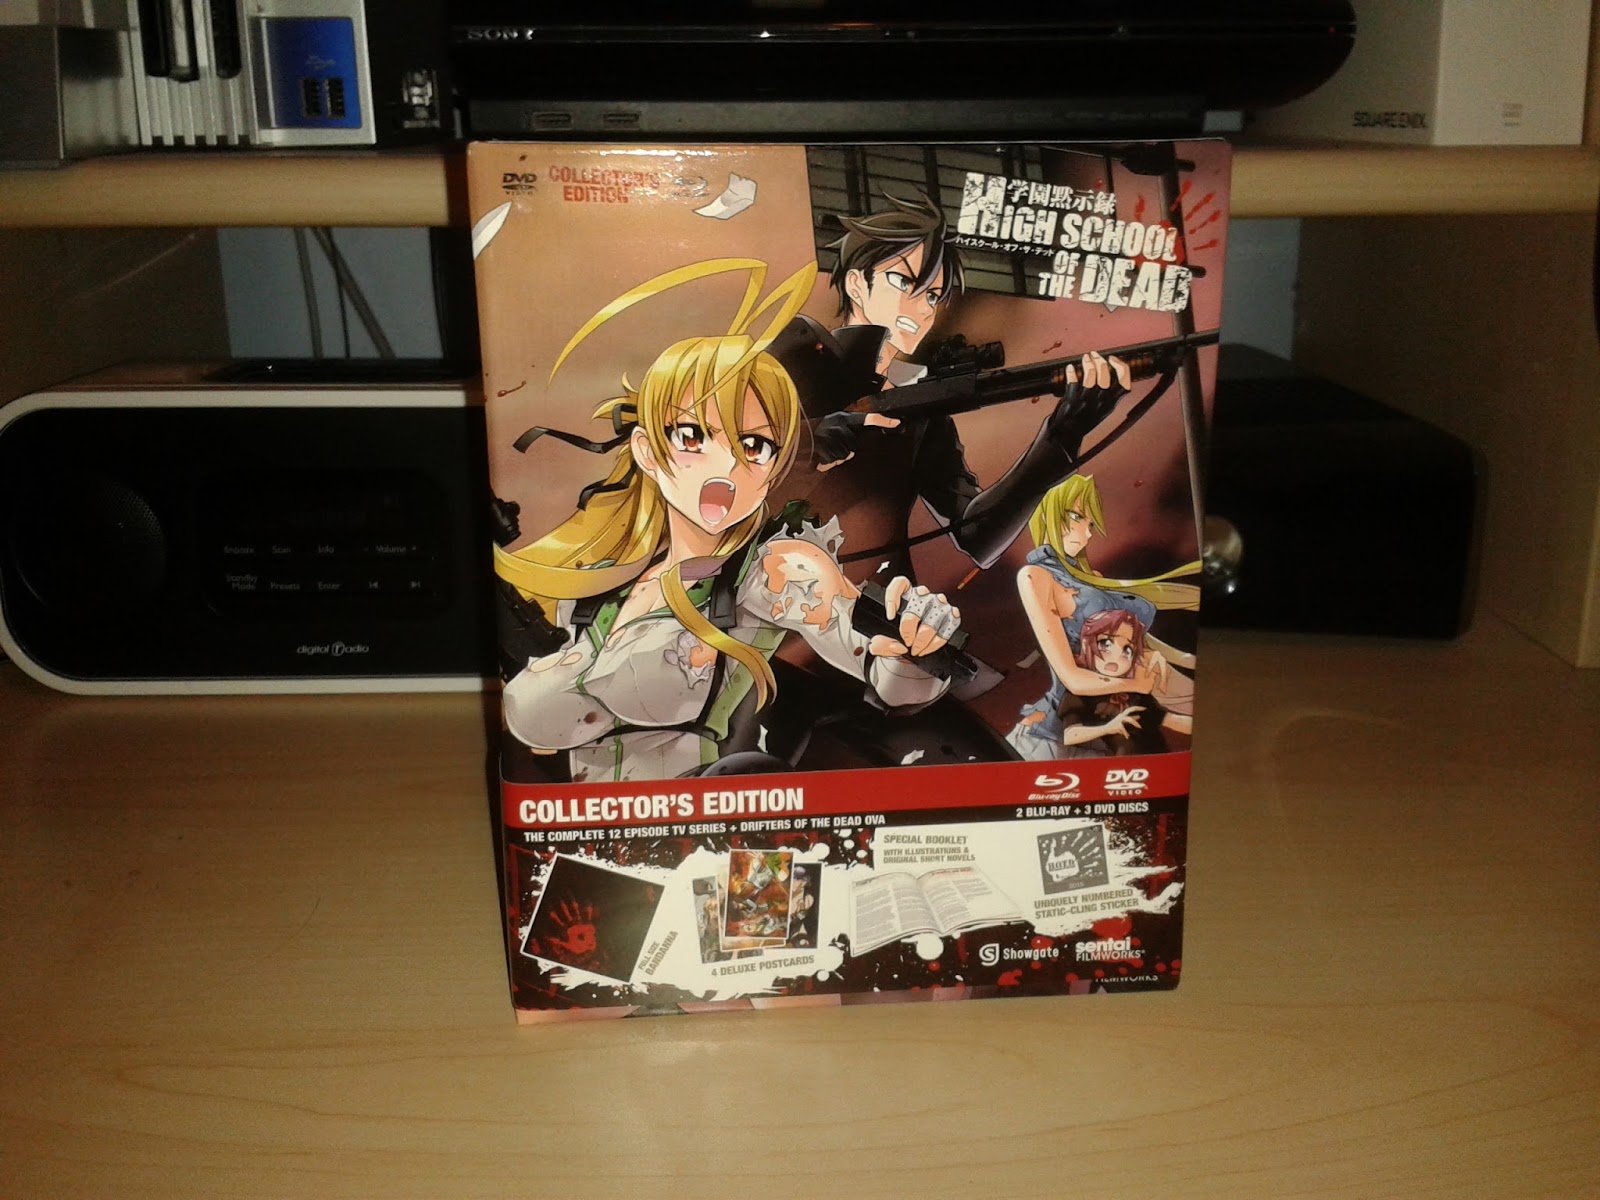 High School Of The Dead - The Complete Series and Drifters Of The Dead